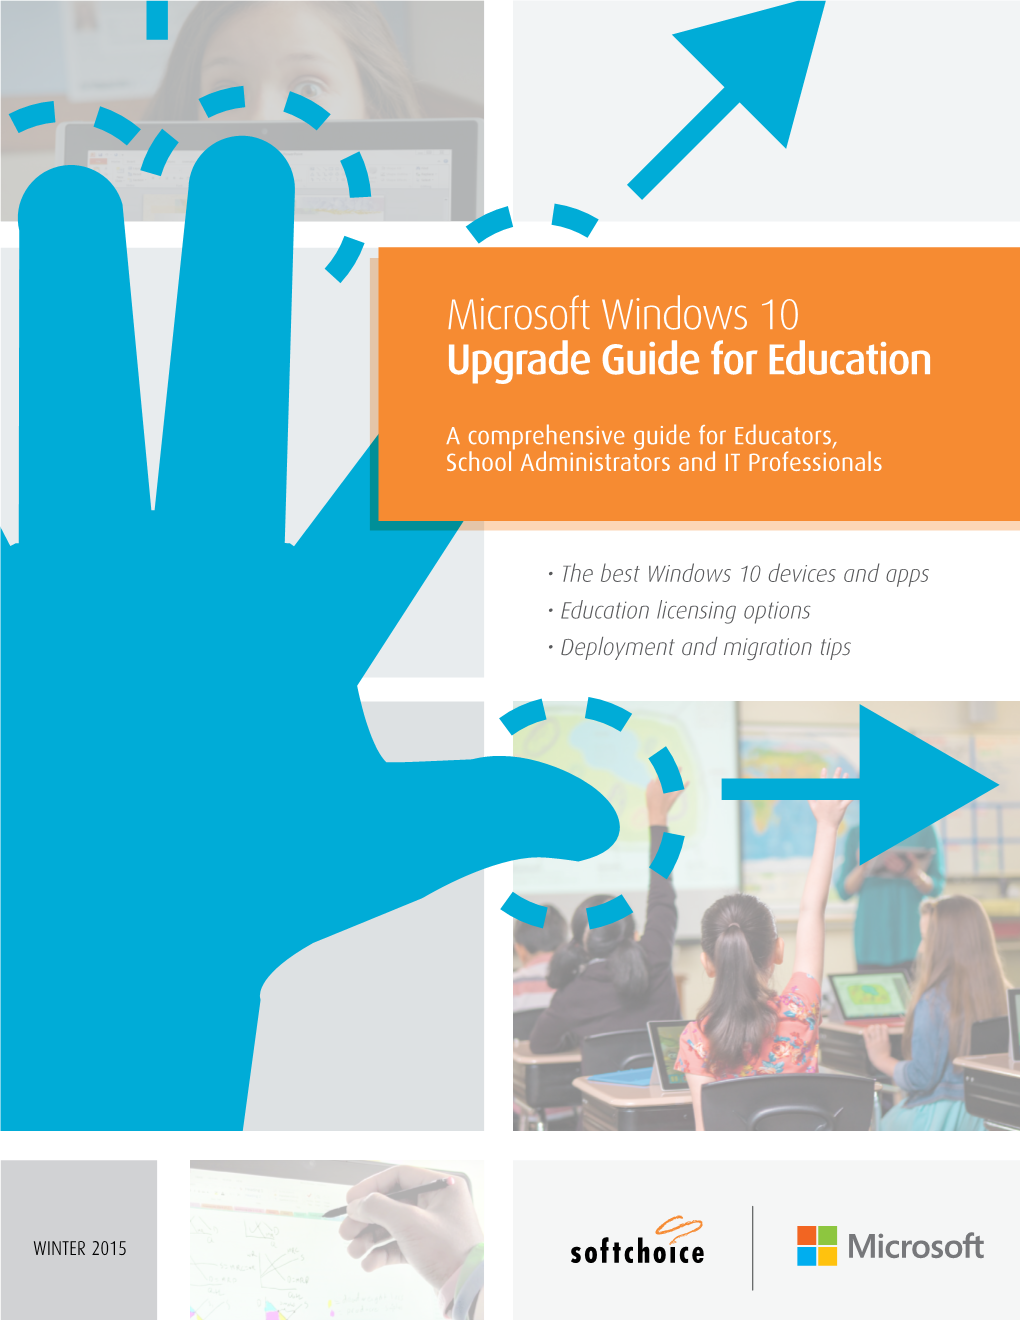 Microsoft Windows 10 Upgrade Guide for Education